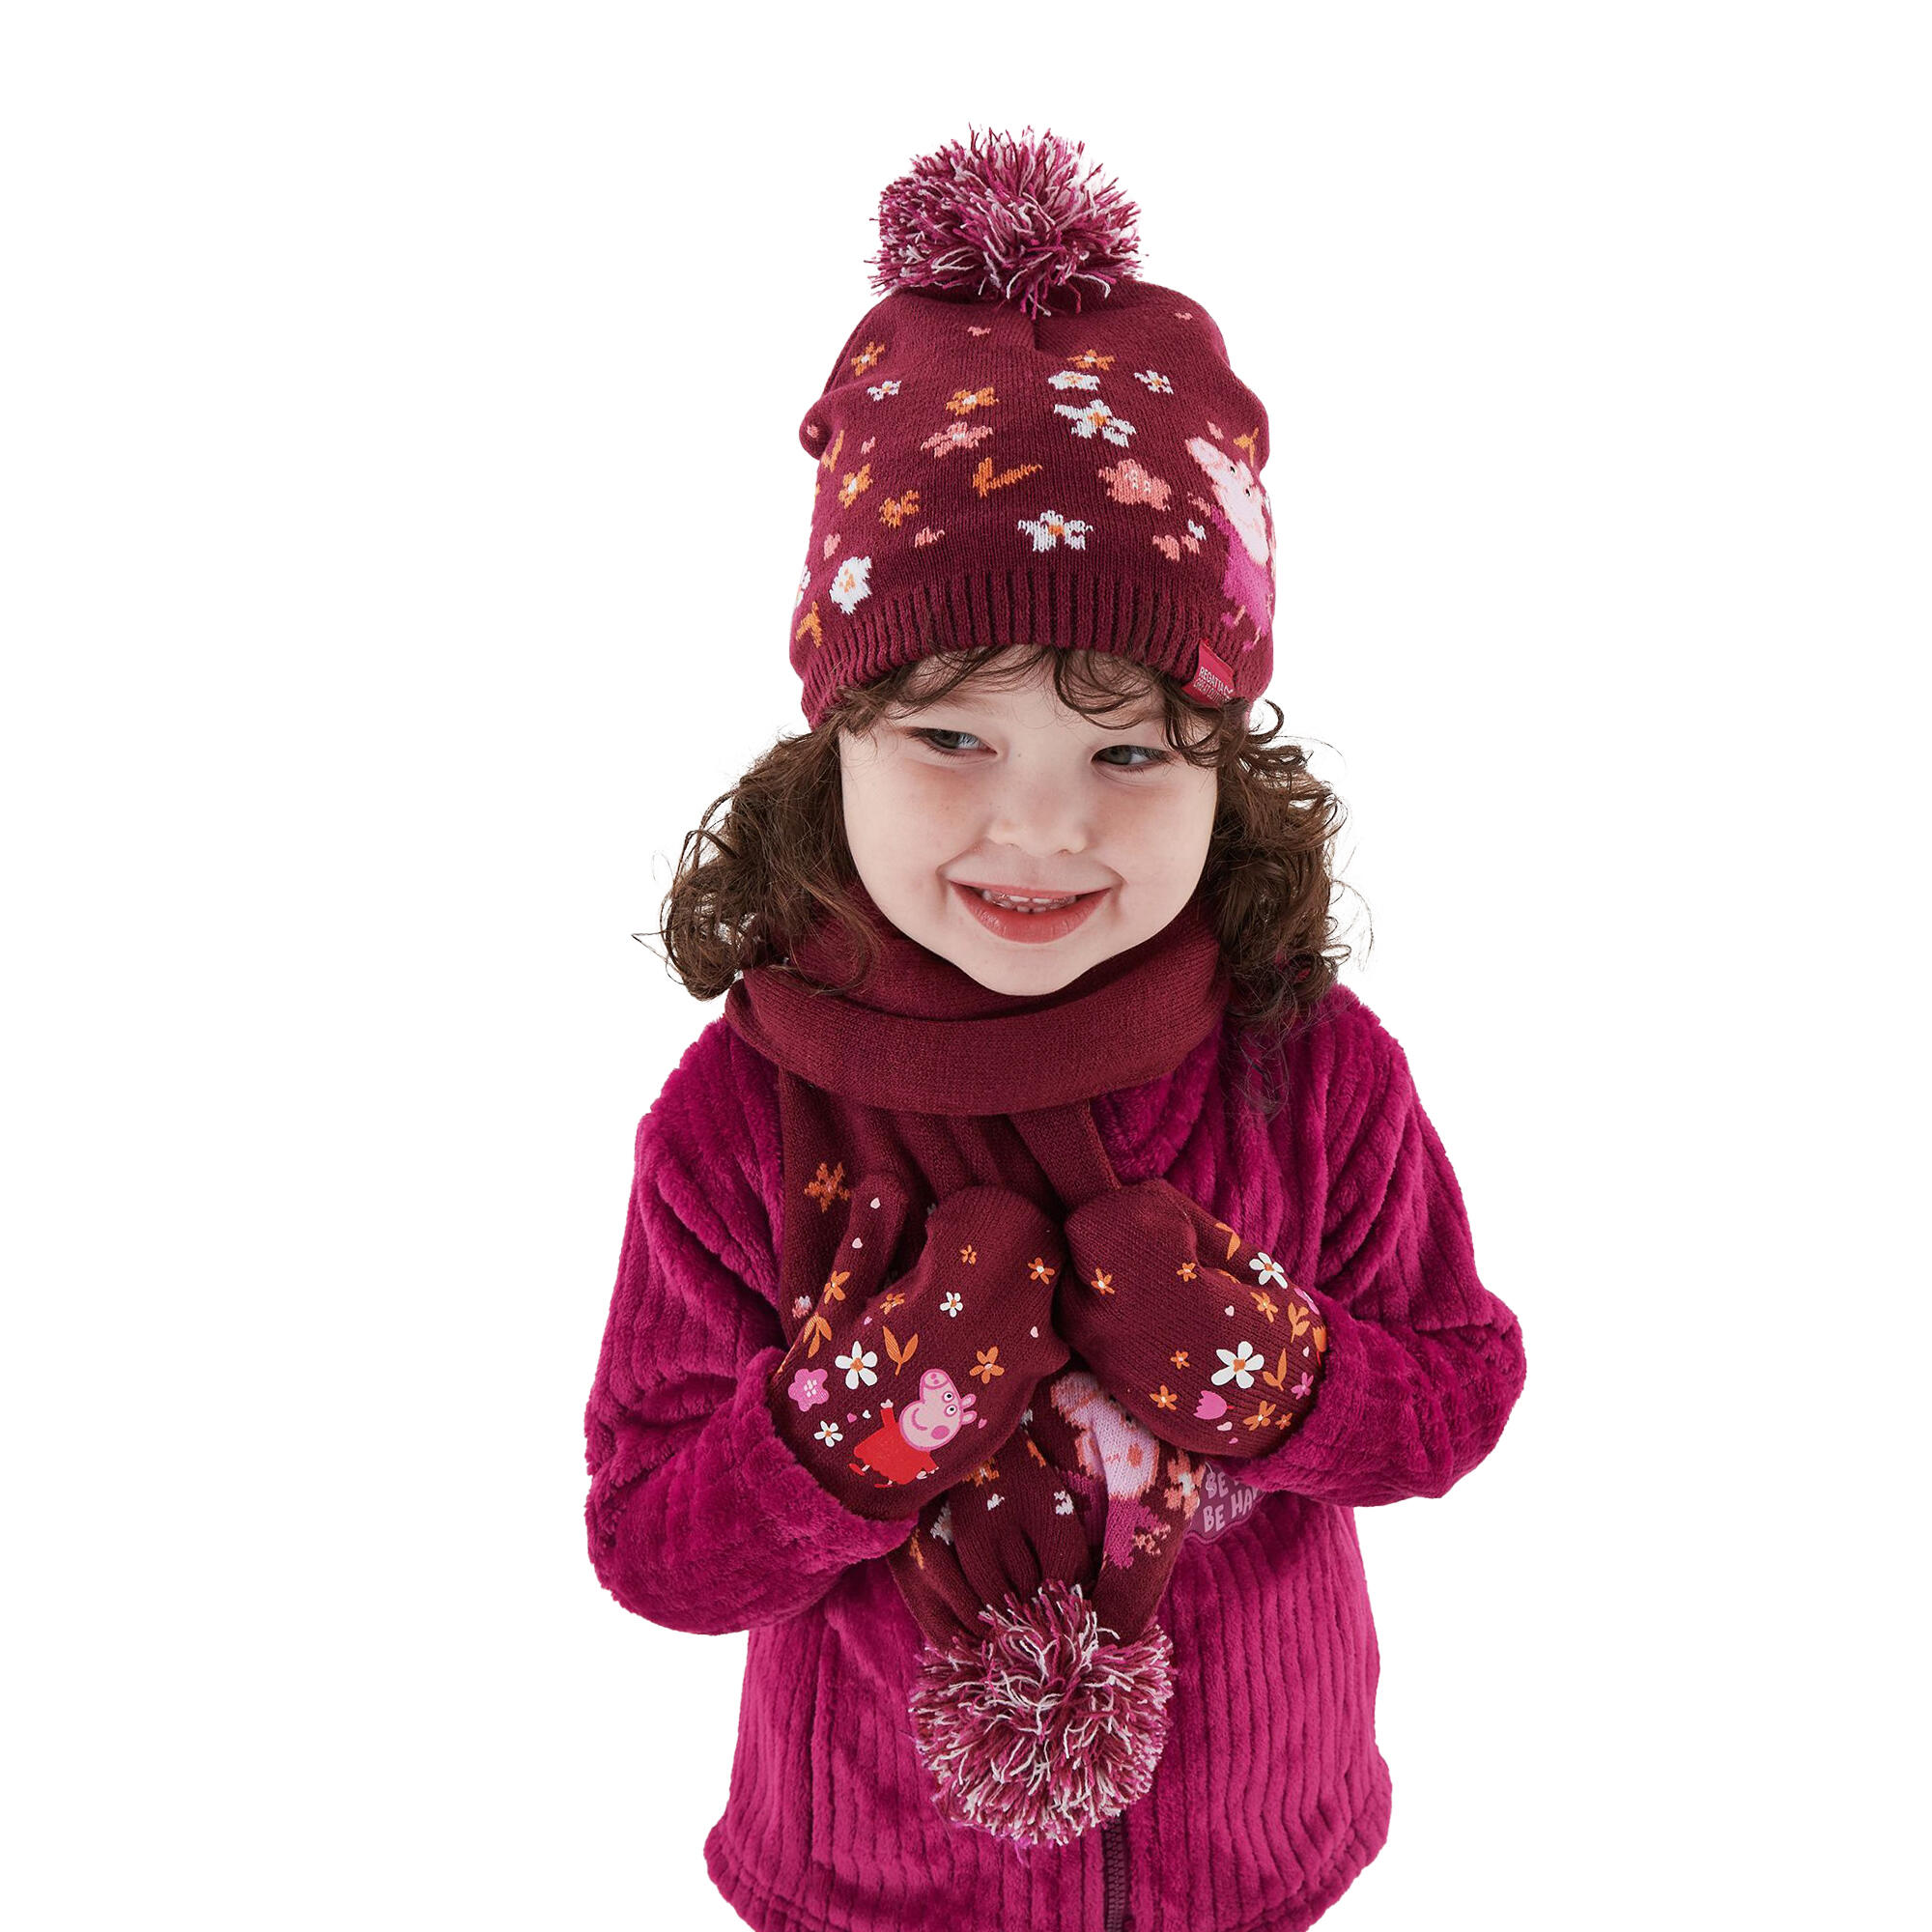 Pom Pom Knitted Peppa Pig Hat Gloves And Scarf Set (Berry Pink/Autumn) 3/4